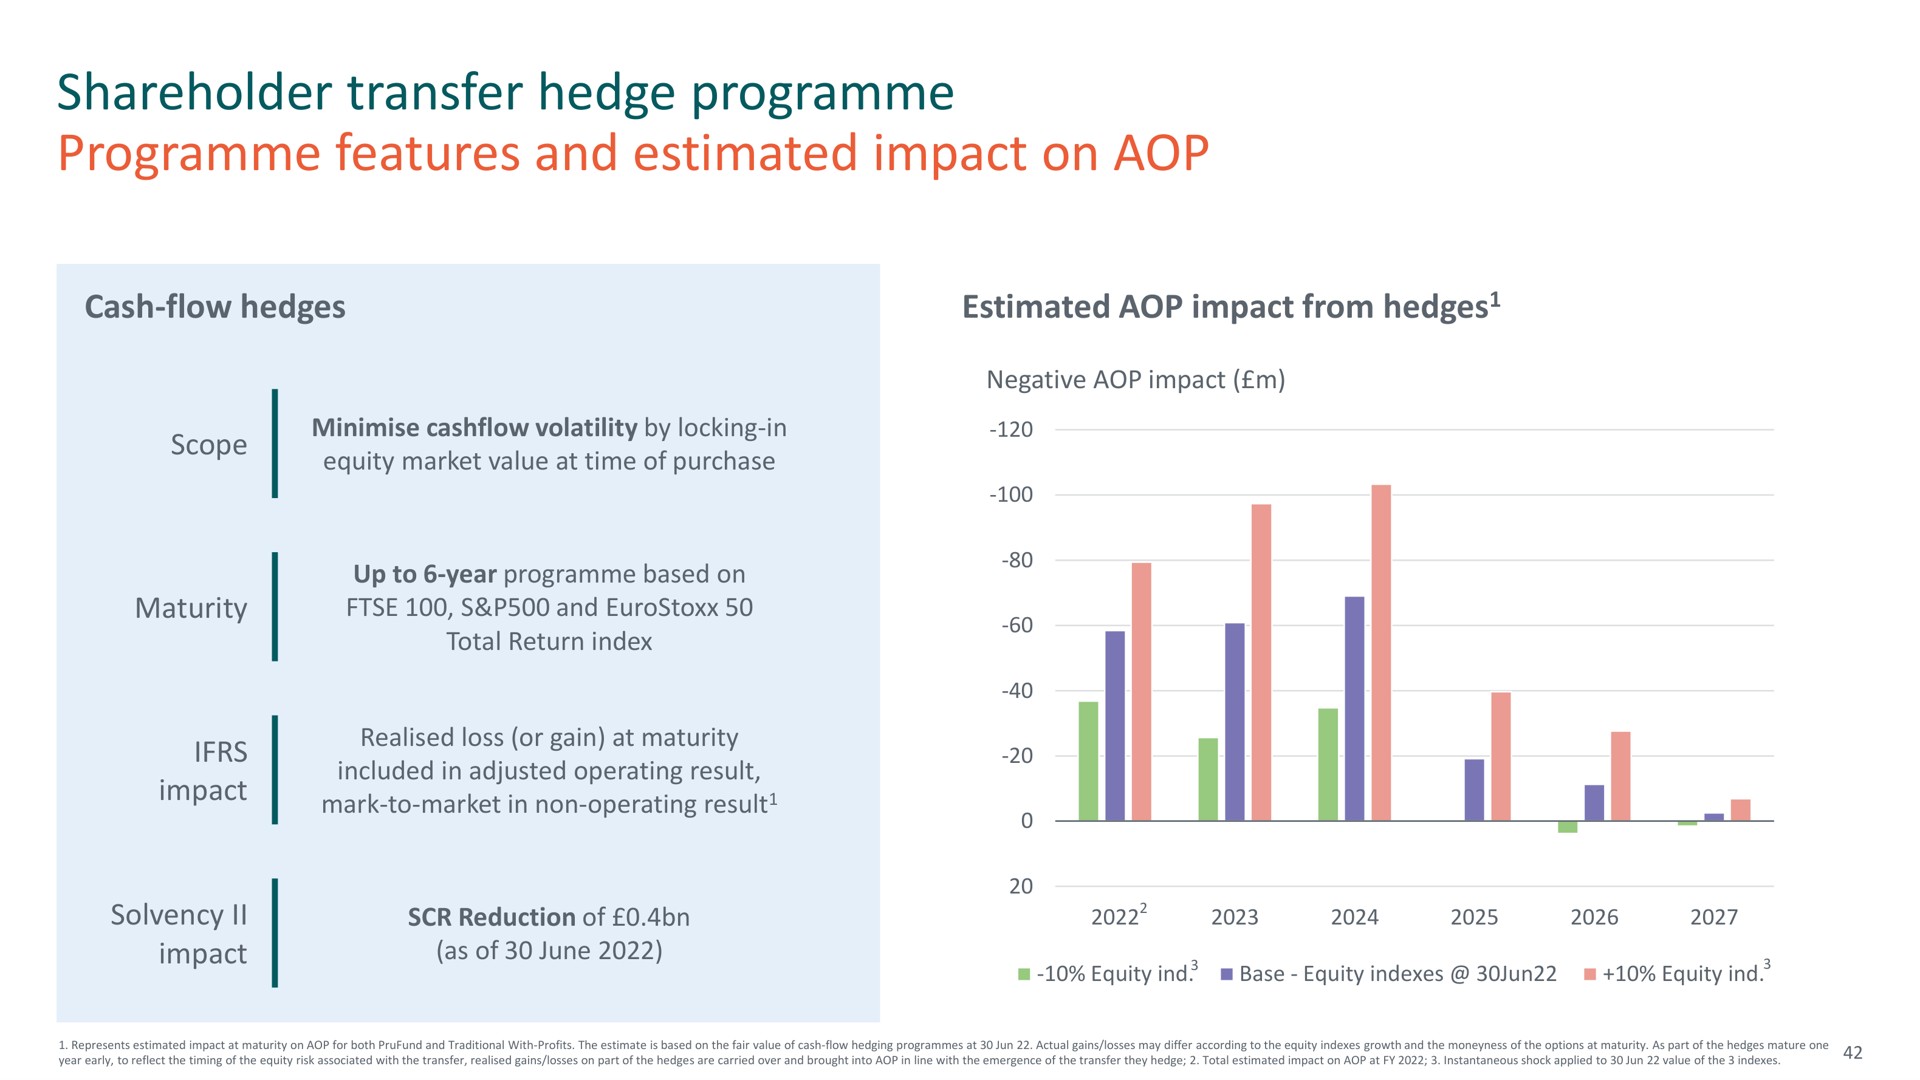 shareholder transfer hedge features and estimated impact on | M&G